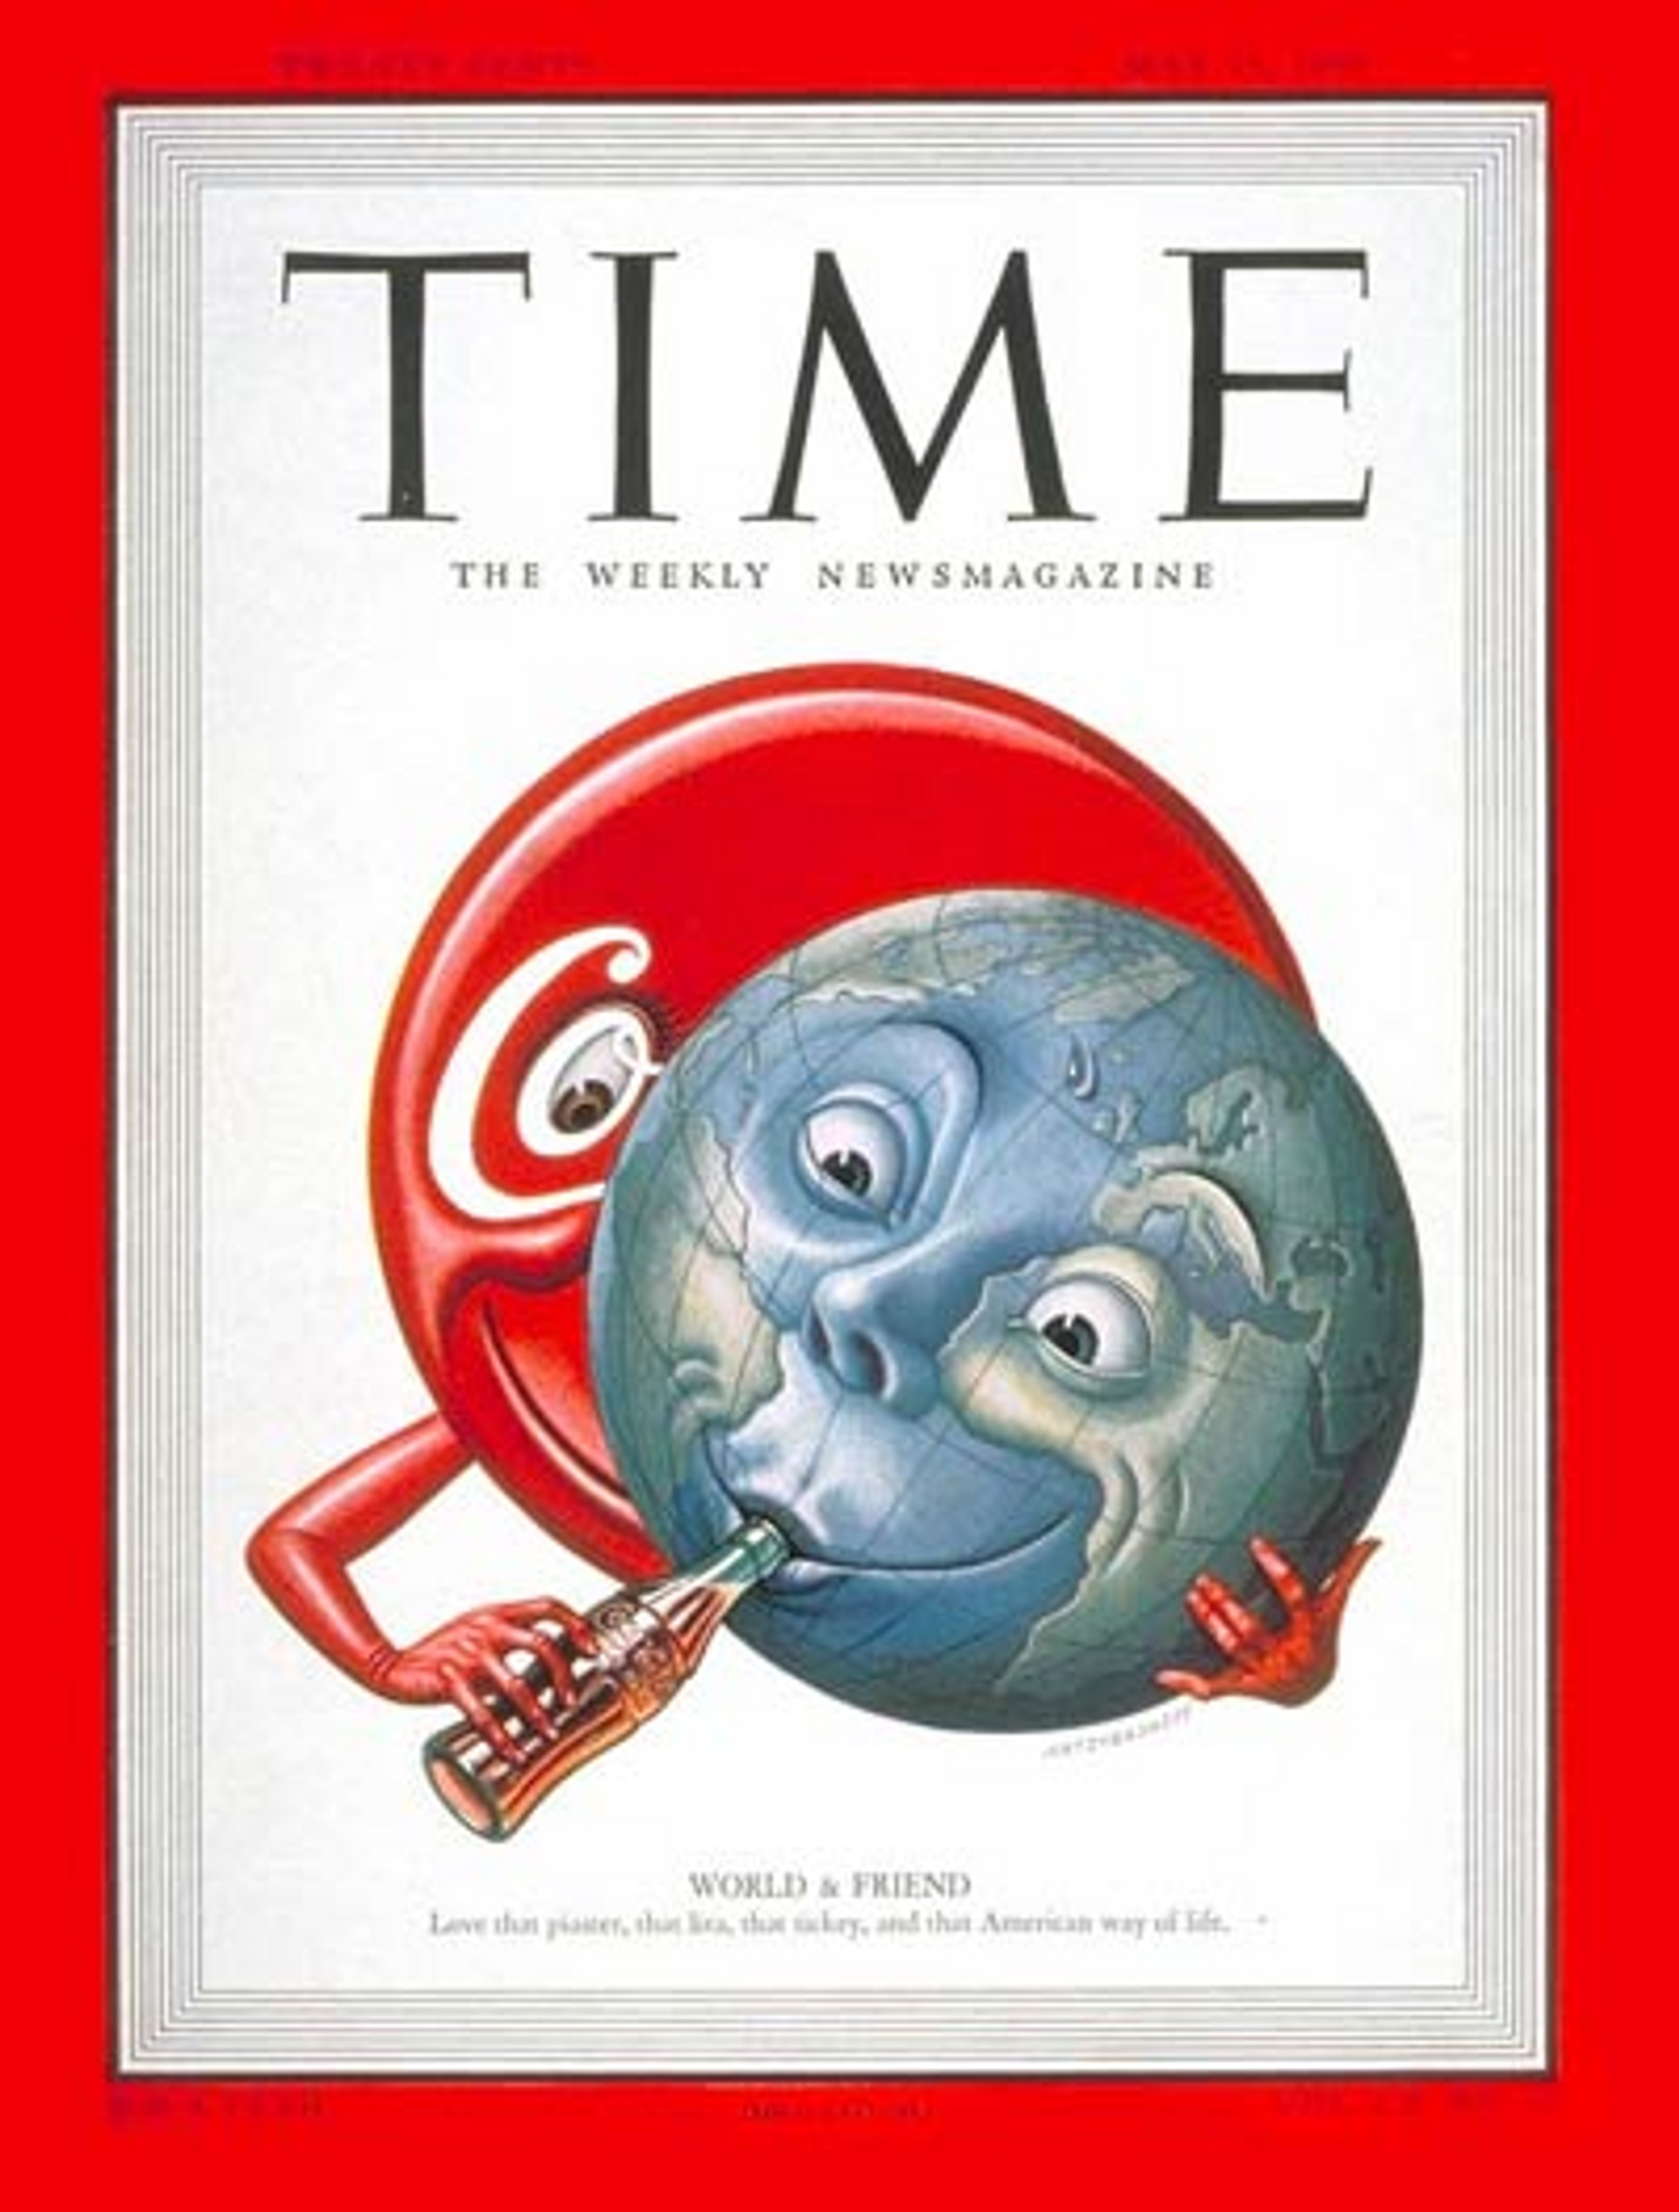 15 May, 1950 cover of Time Magazine featuring Coca-Cola giving a drink to the world. - Sputnik International, 1920, 07.09.2021